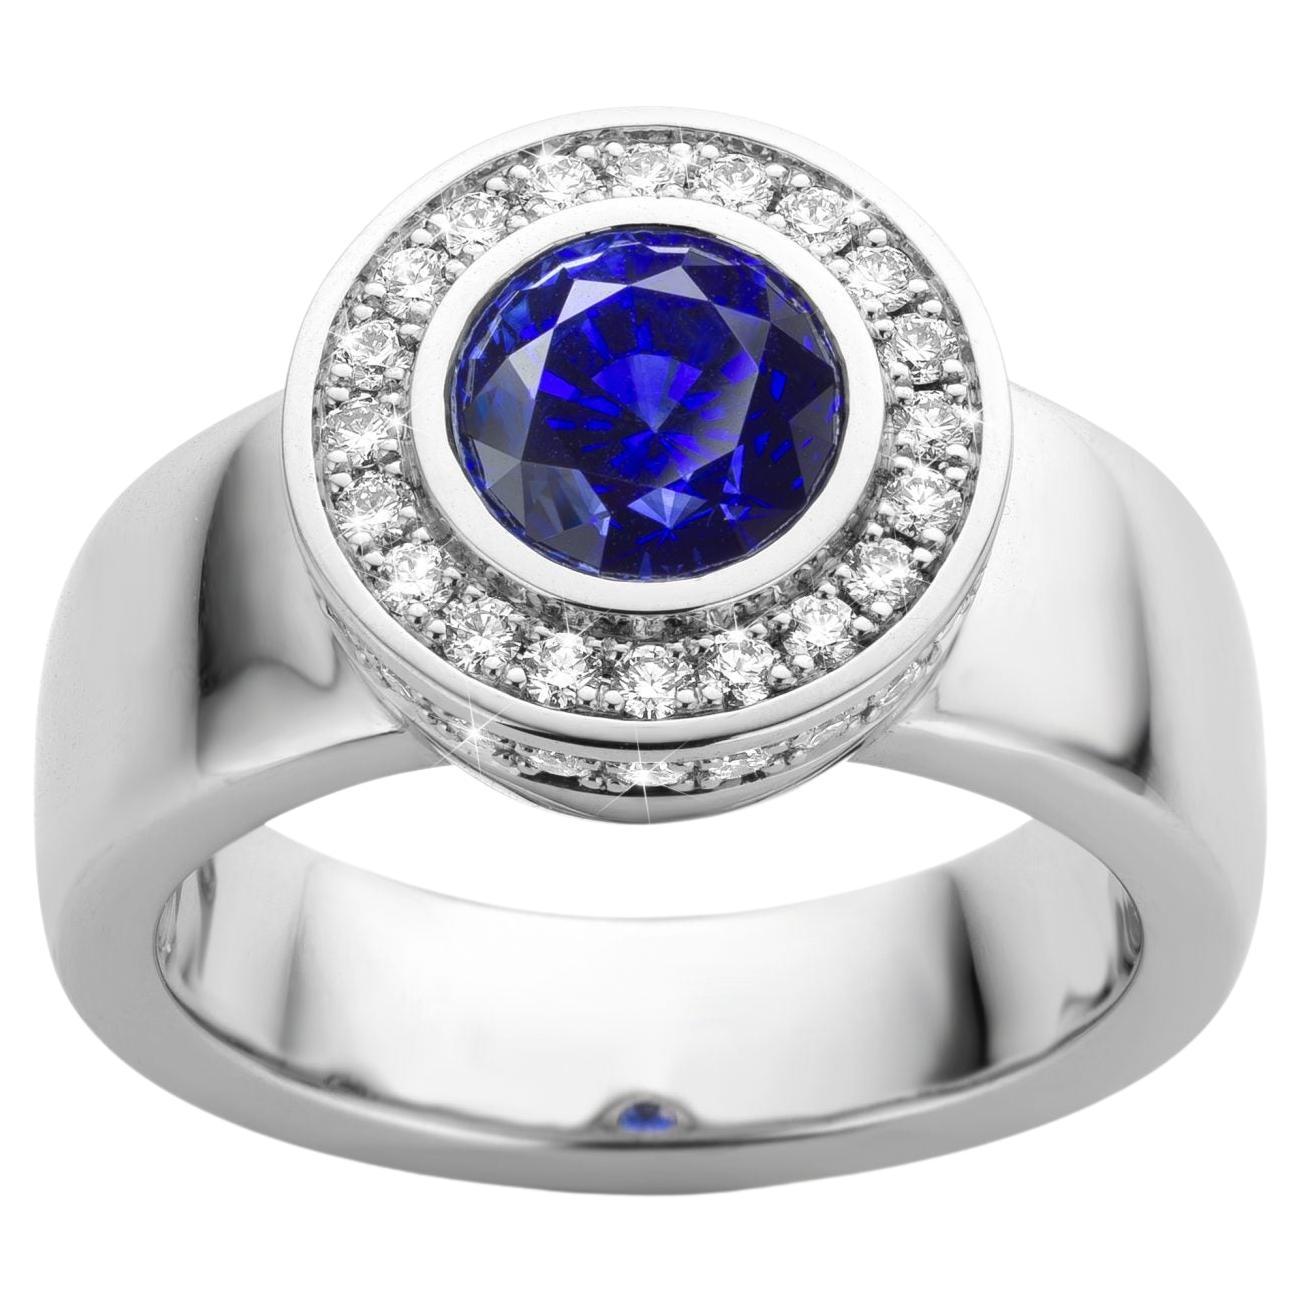 Cober "Something Royal" with Blue Natural Sapphire (VVS) & 55 Diamonds Ring For Sale